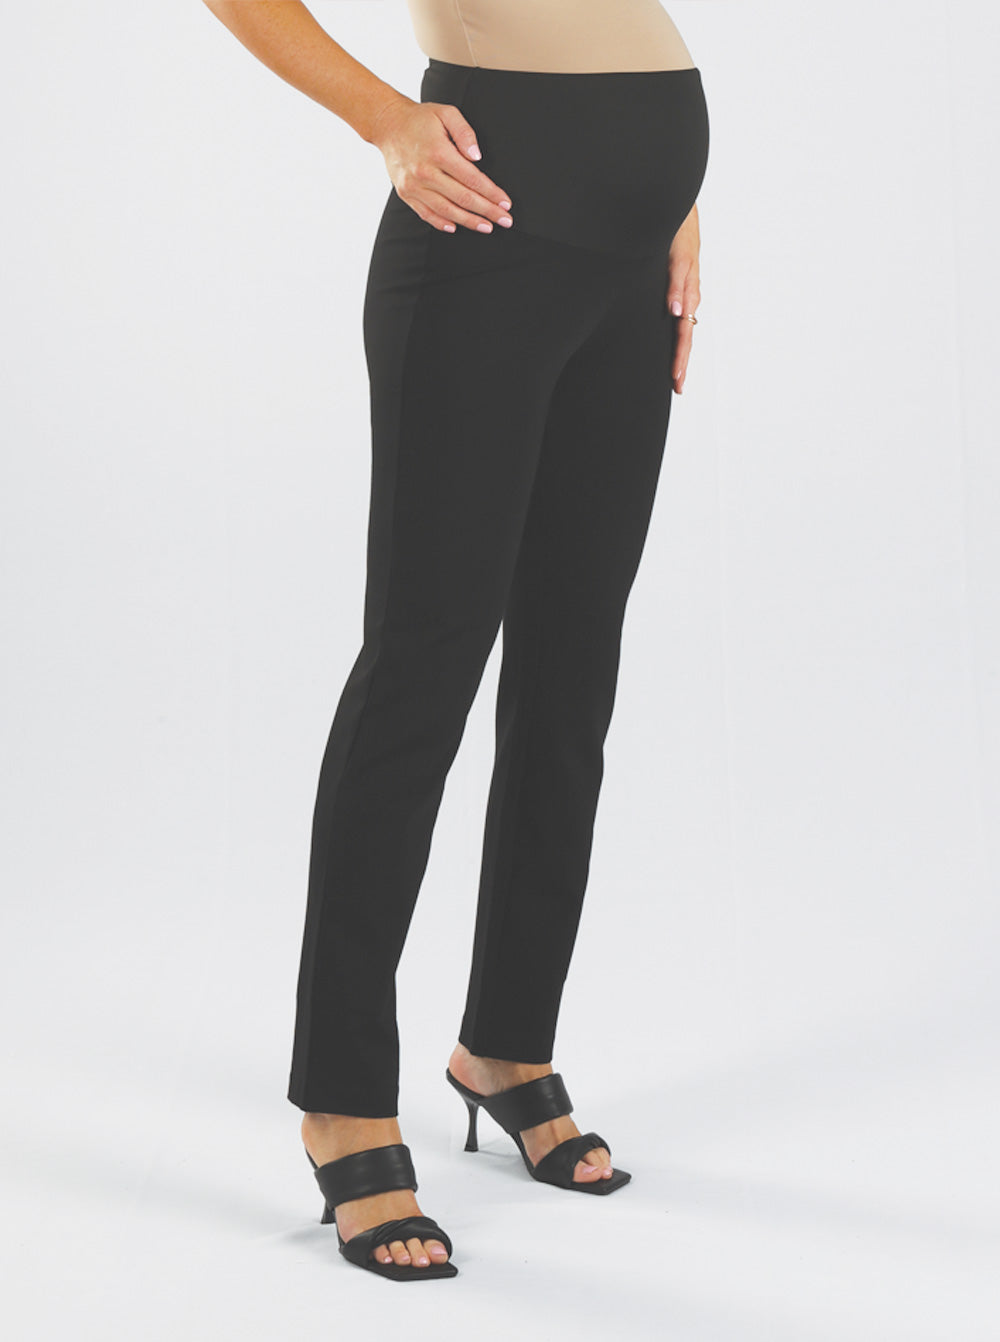 Introducing Our New Maternity Work Pants